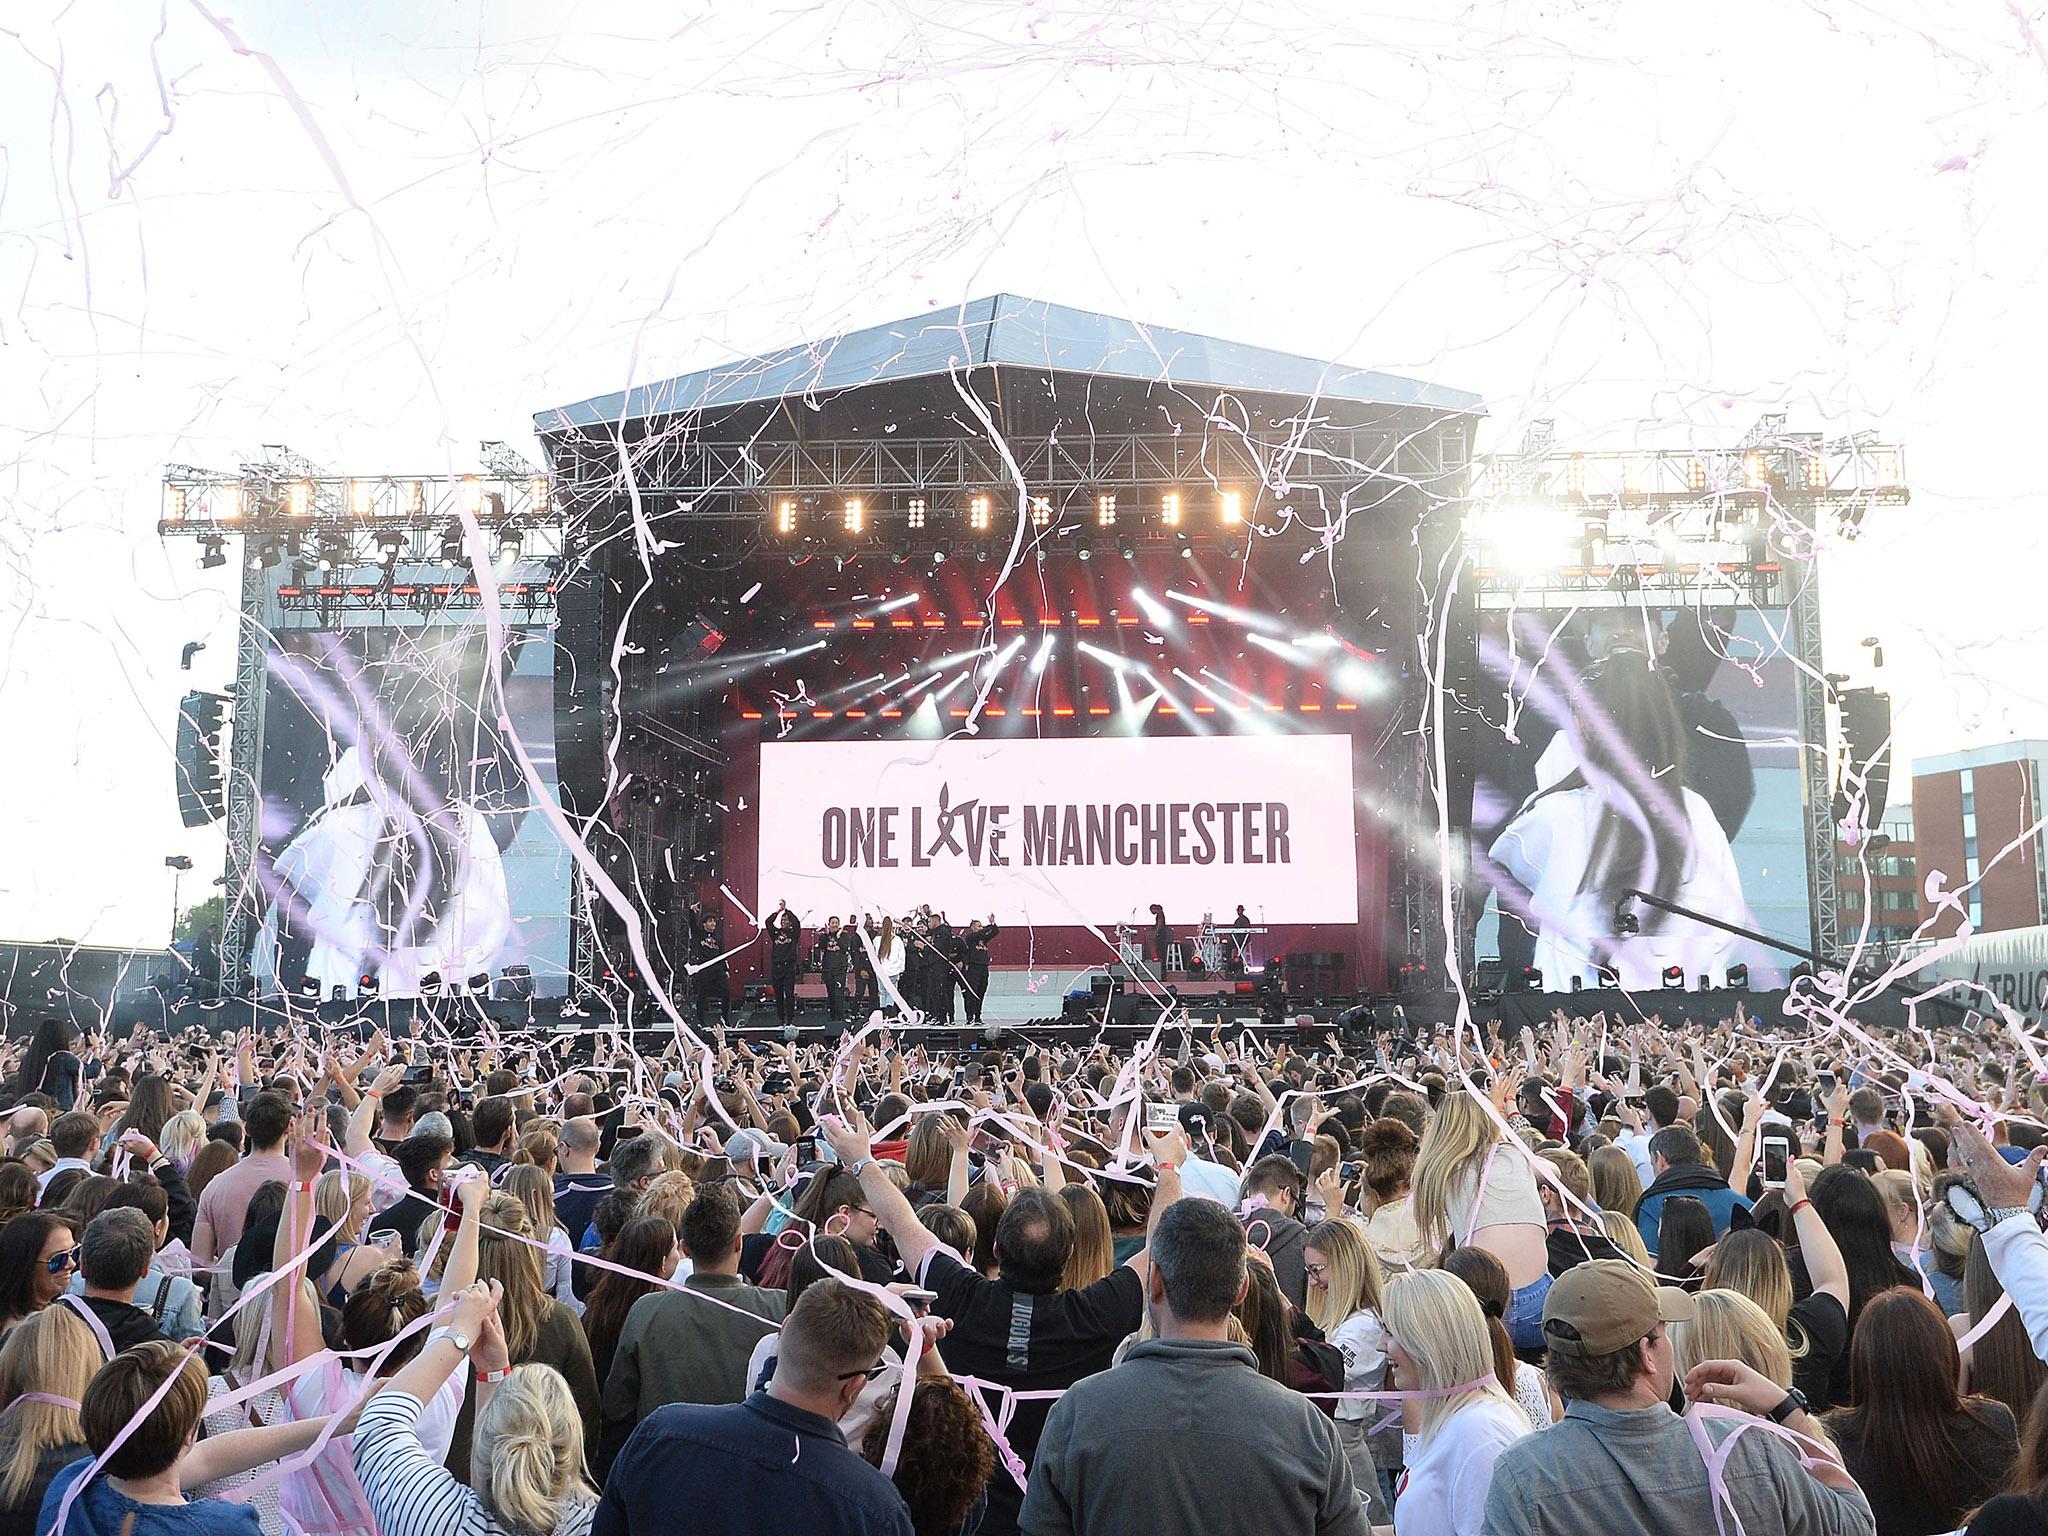 Ariana Grande performs at her One Love Manchester concert in June